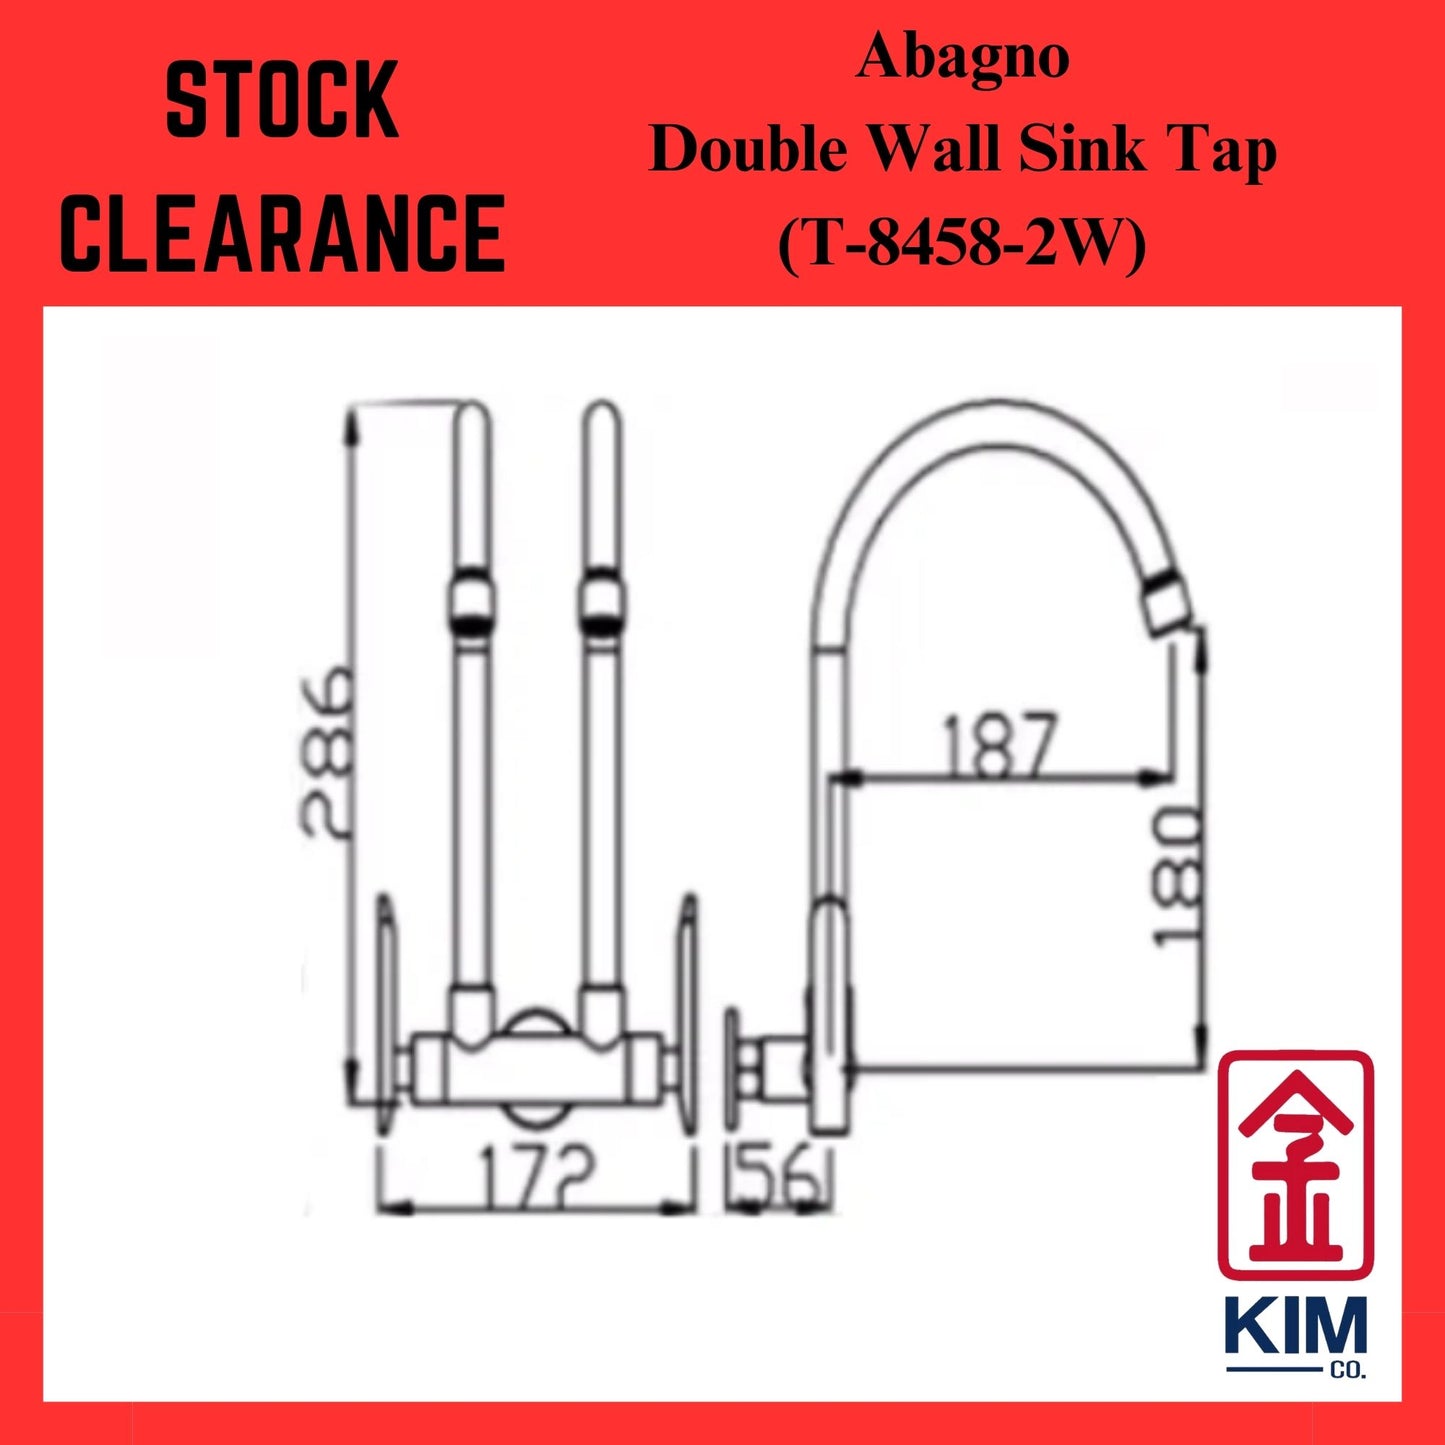 ( Stock Clearance ) Abagno Wall Mounted Double Kitchen Sink Tap (T-8458-2W)